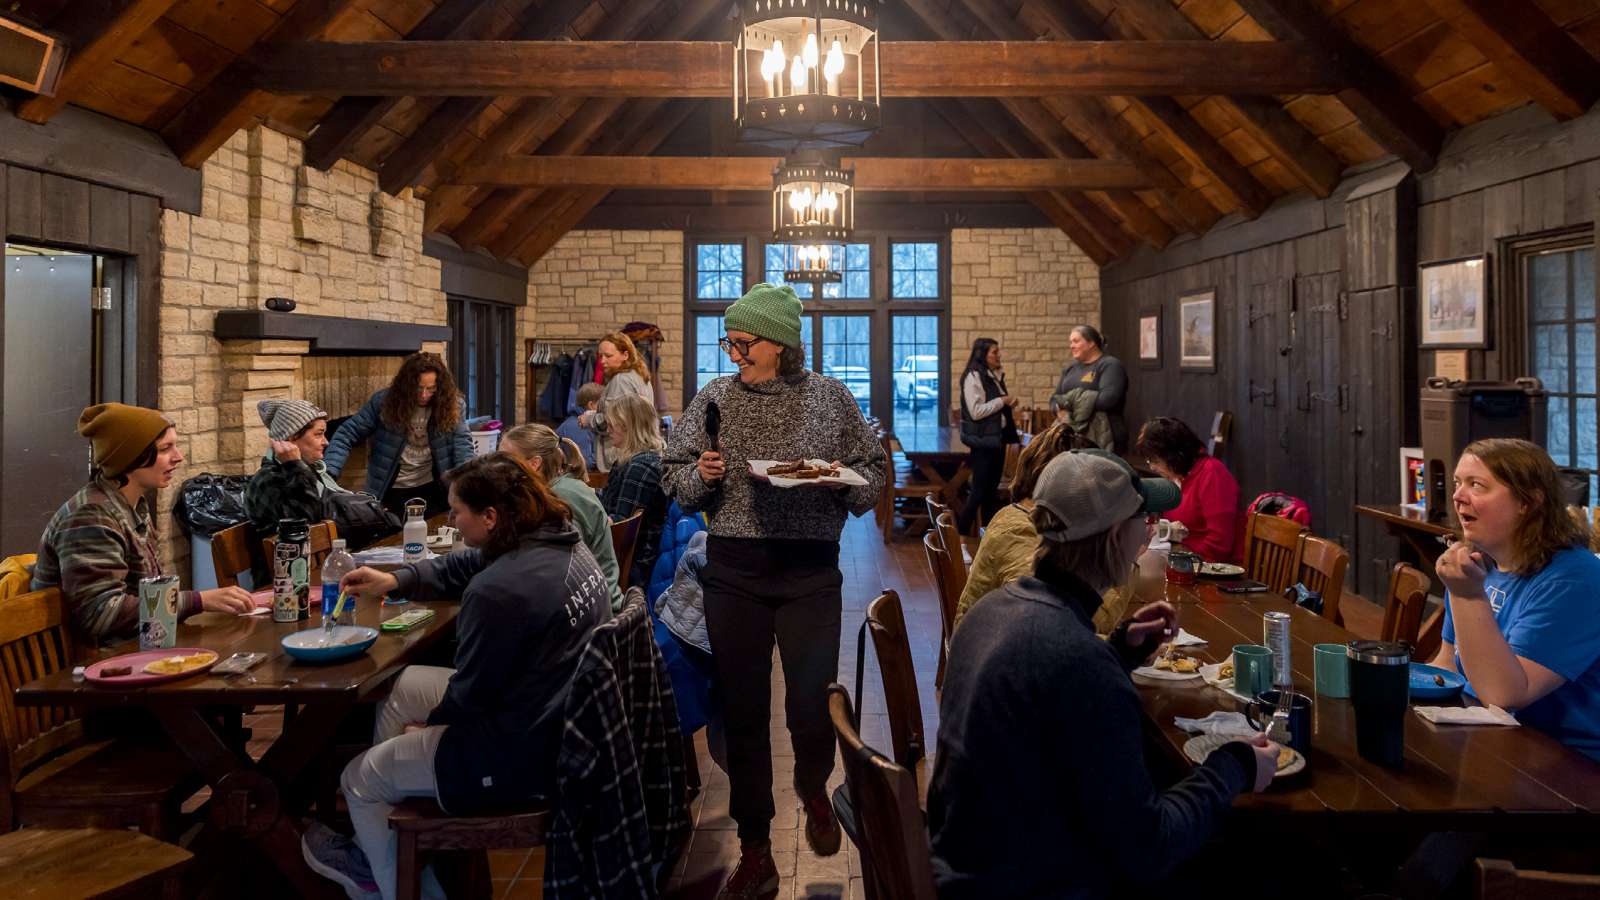 “Wanderers” who signed up for a 2024 Wander Women trip or event were invited to an introductory pancake breakfast to meet one another